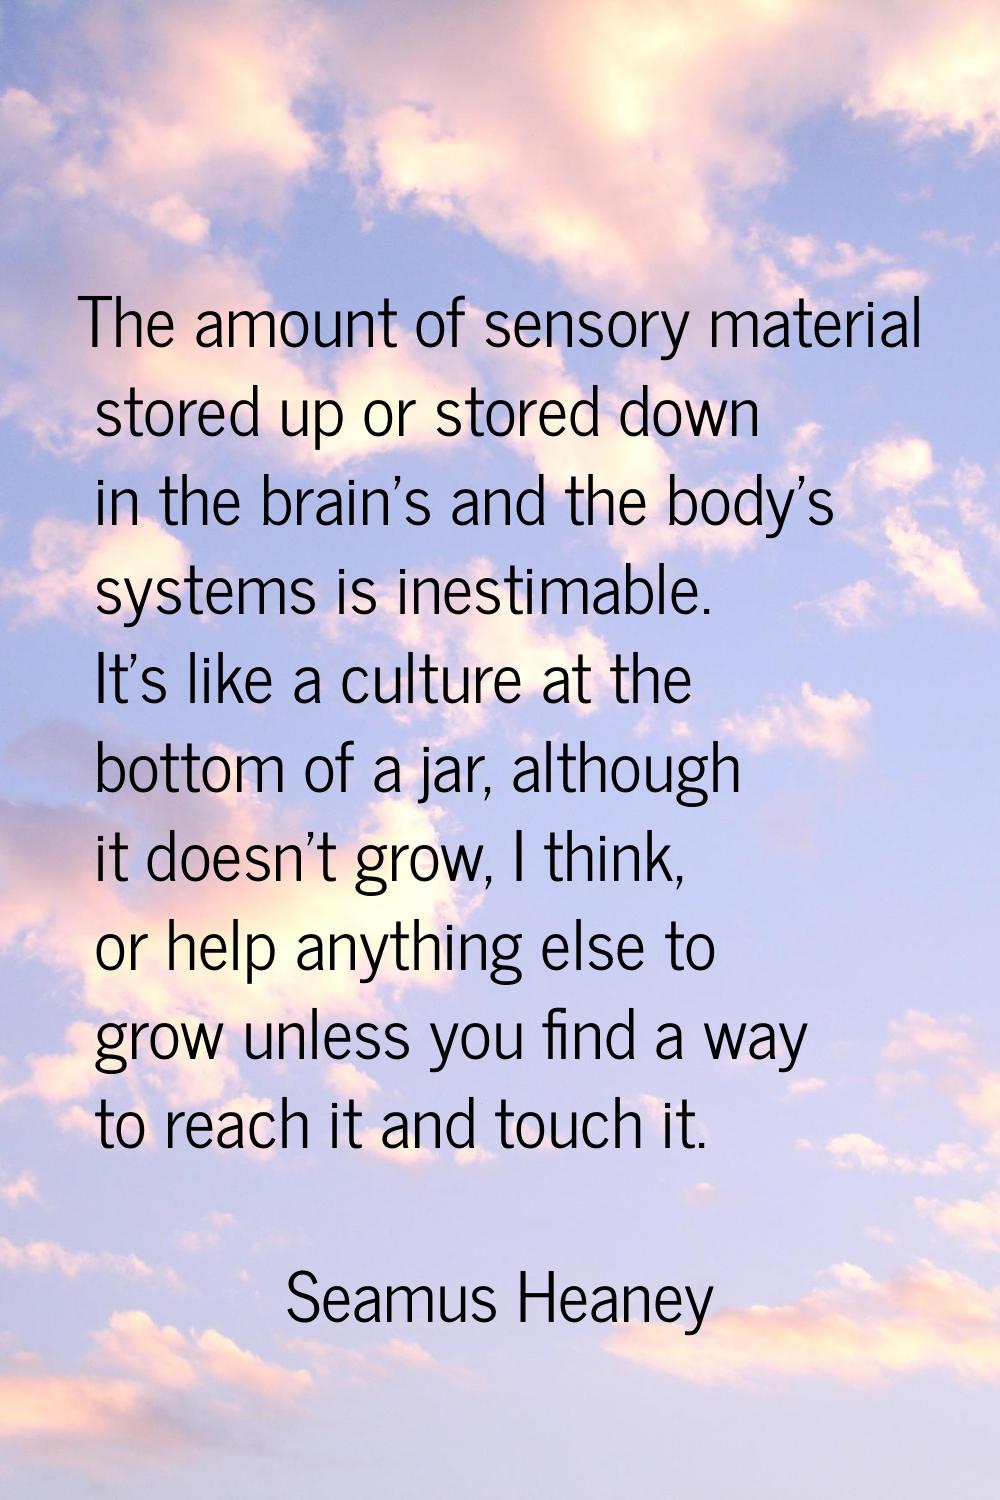 The amount of sensory material stored up or stored down in the brain's and the body's systems is in